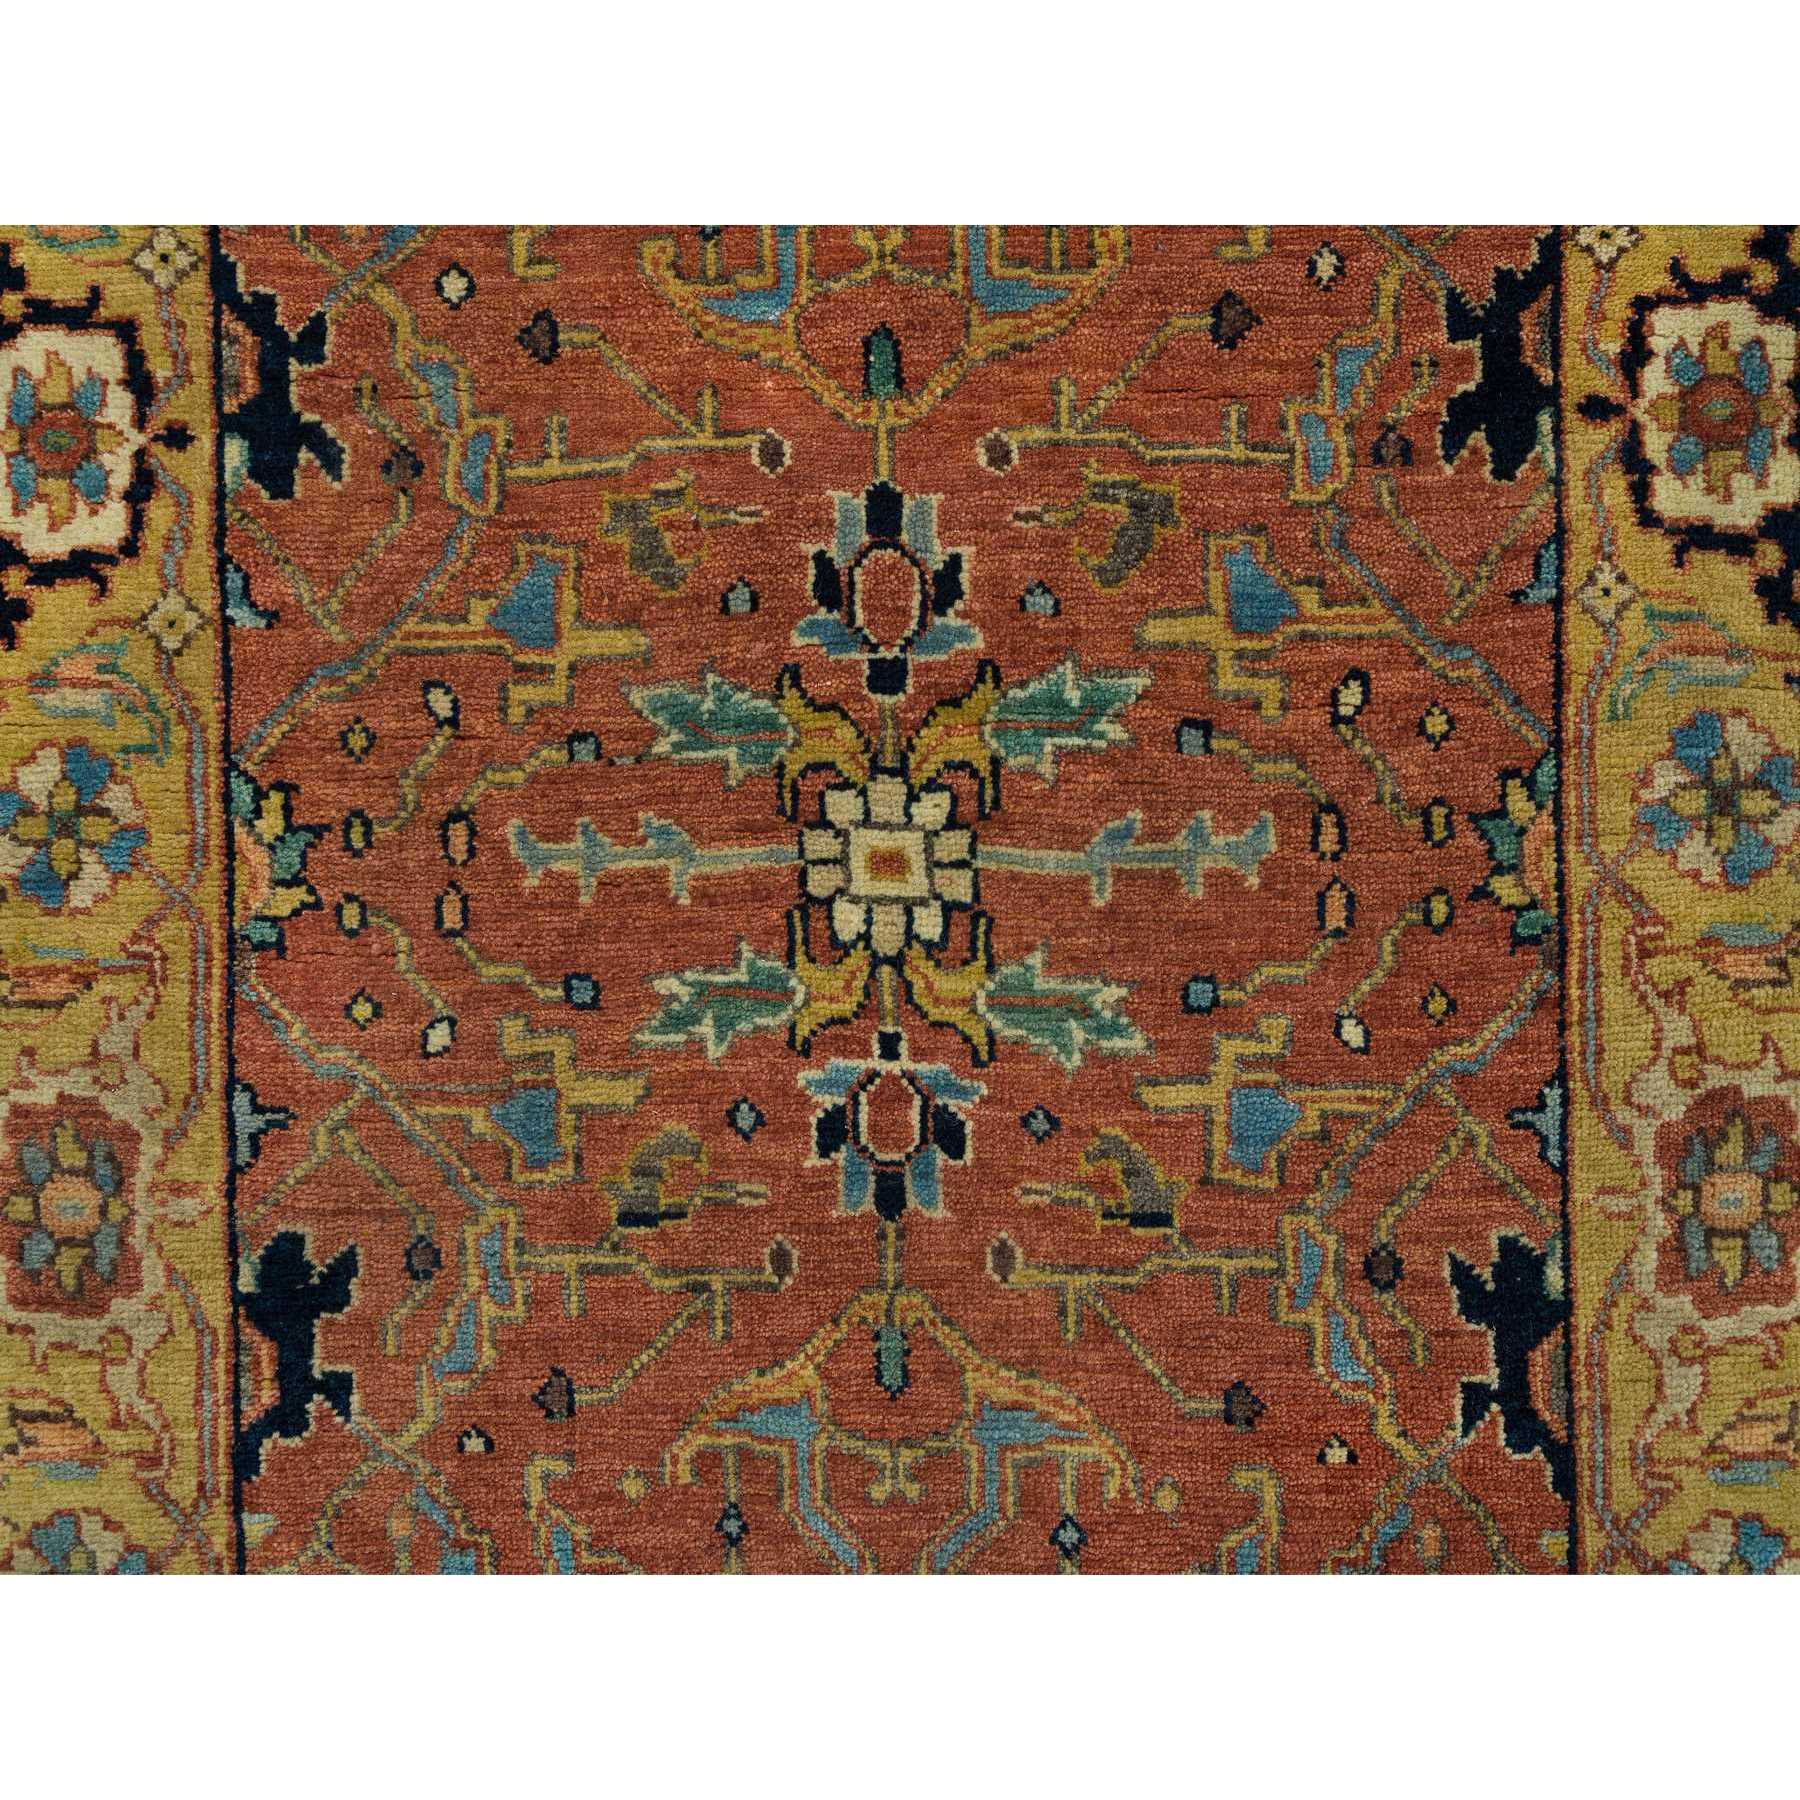 2'5"x6'2" Terracotta Red, Thick and Lush Soft Pile, Antiqued Fine Heriz Re-Creation, Hand Woven, Natural Wool, Runner, Dense Weave, Oriental Rug 